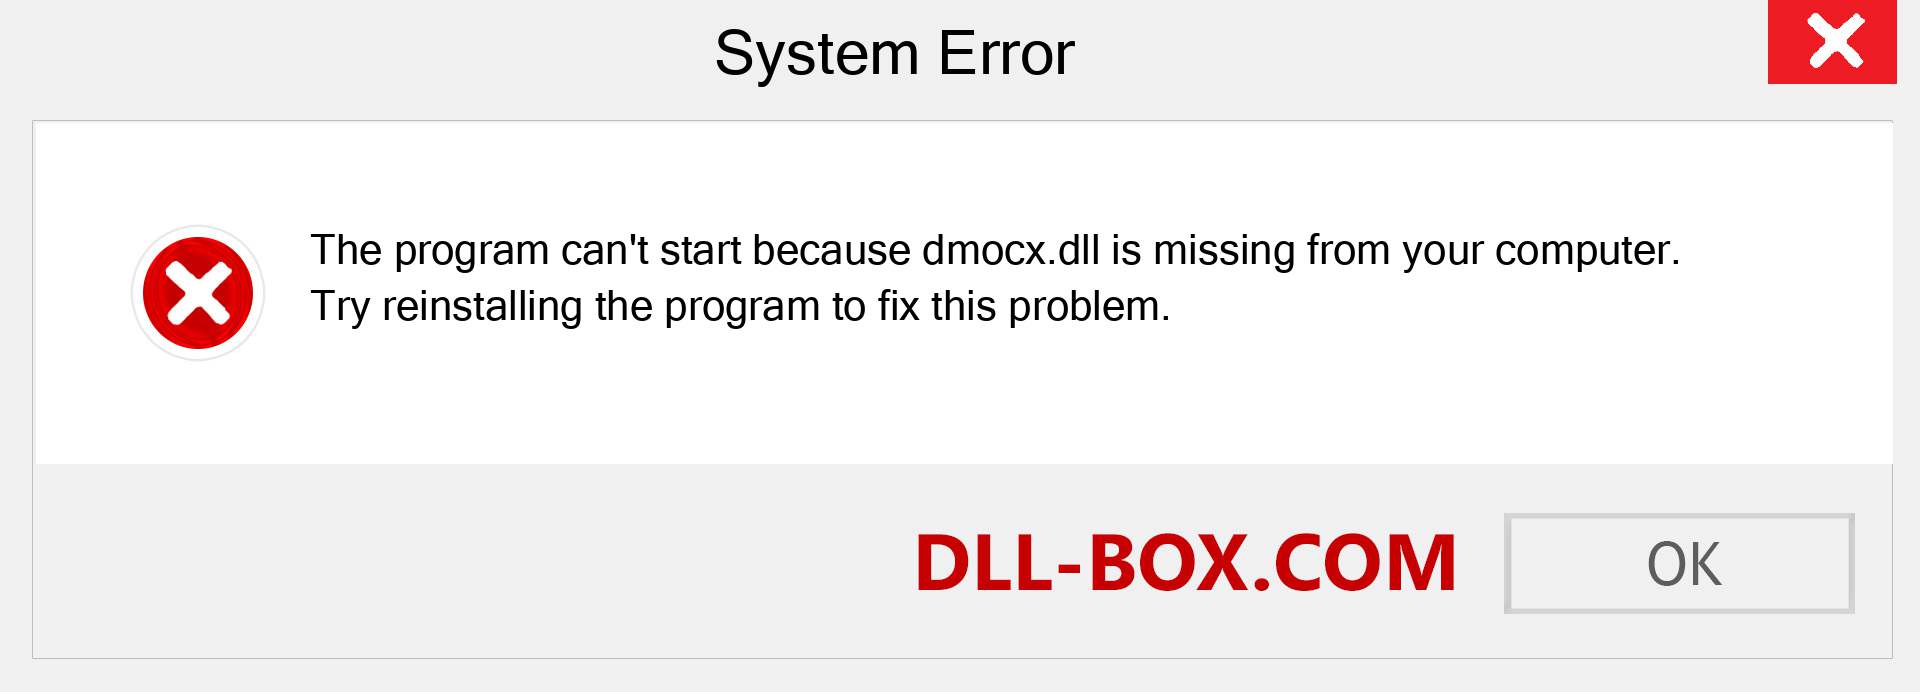  dmocx.dll file is missing?. Download for Windows 7, 8, 10 - Fix  dmocx dll Missing Error on Windows, photos, images